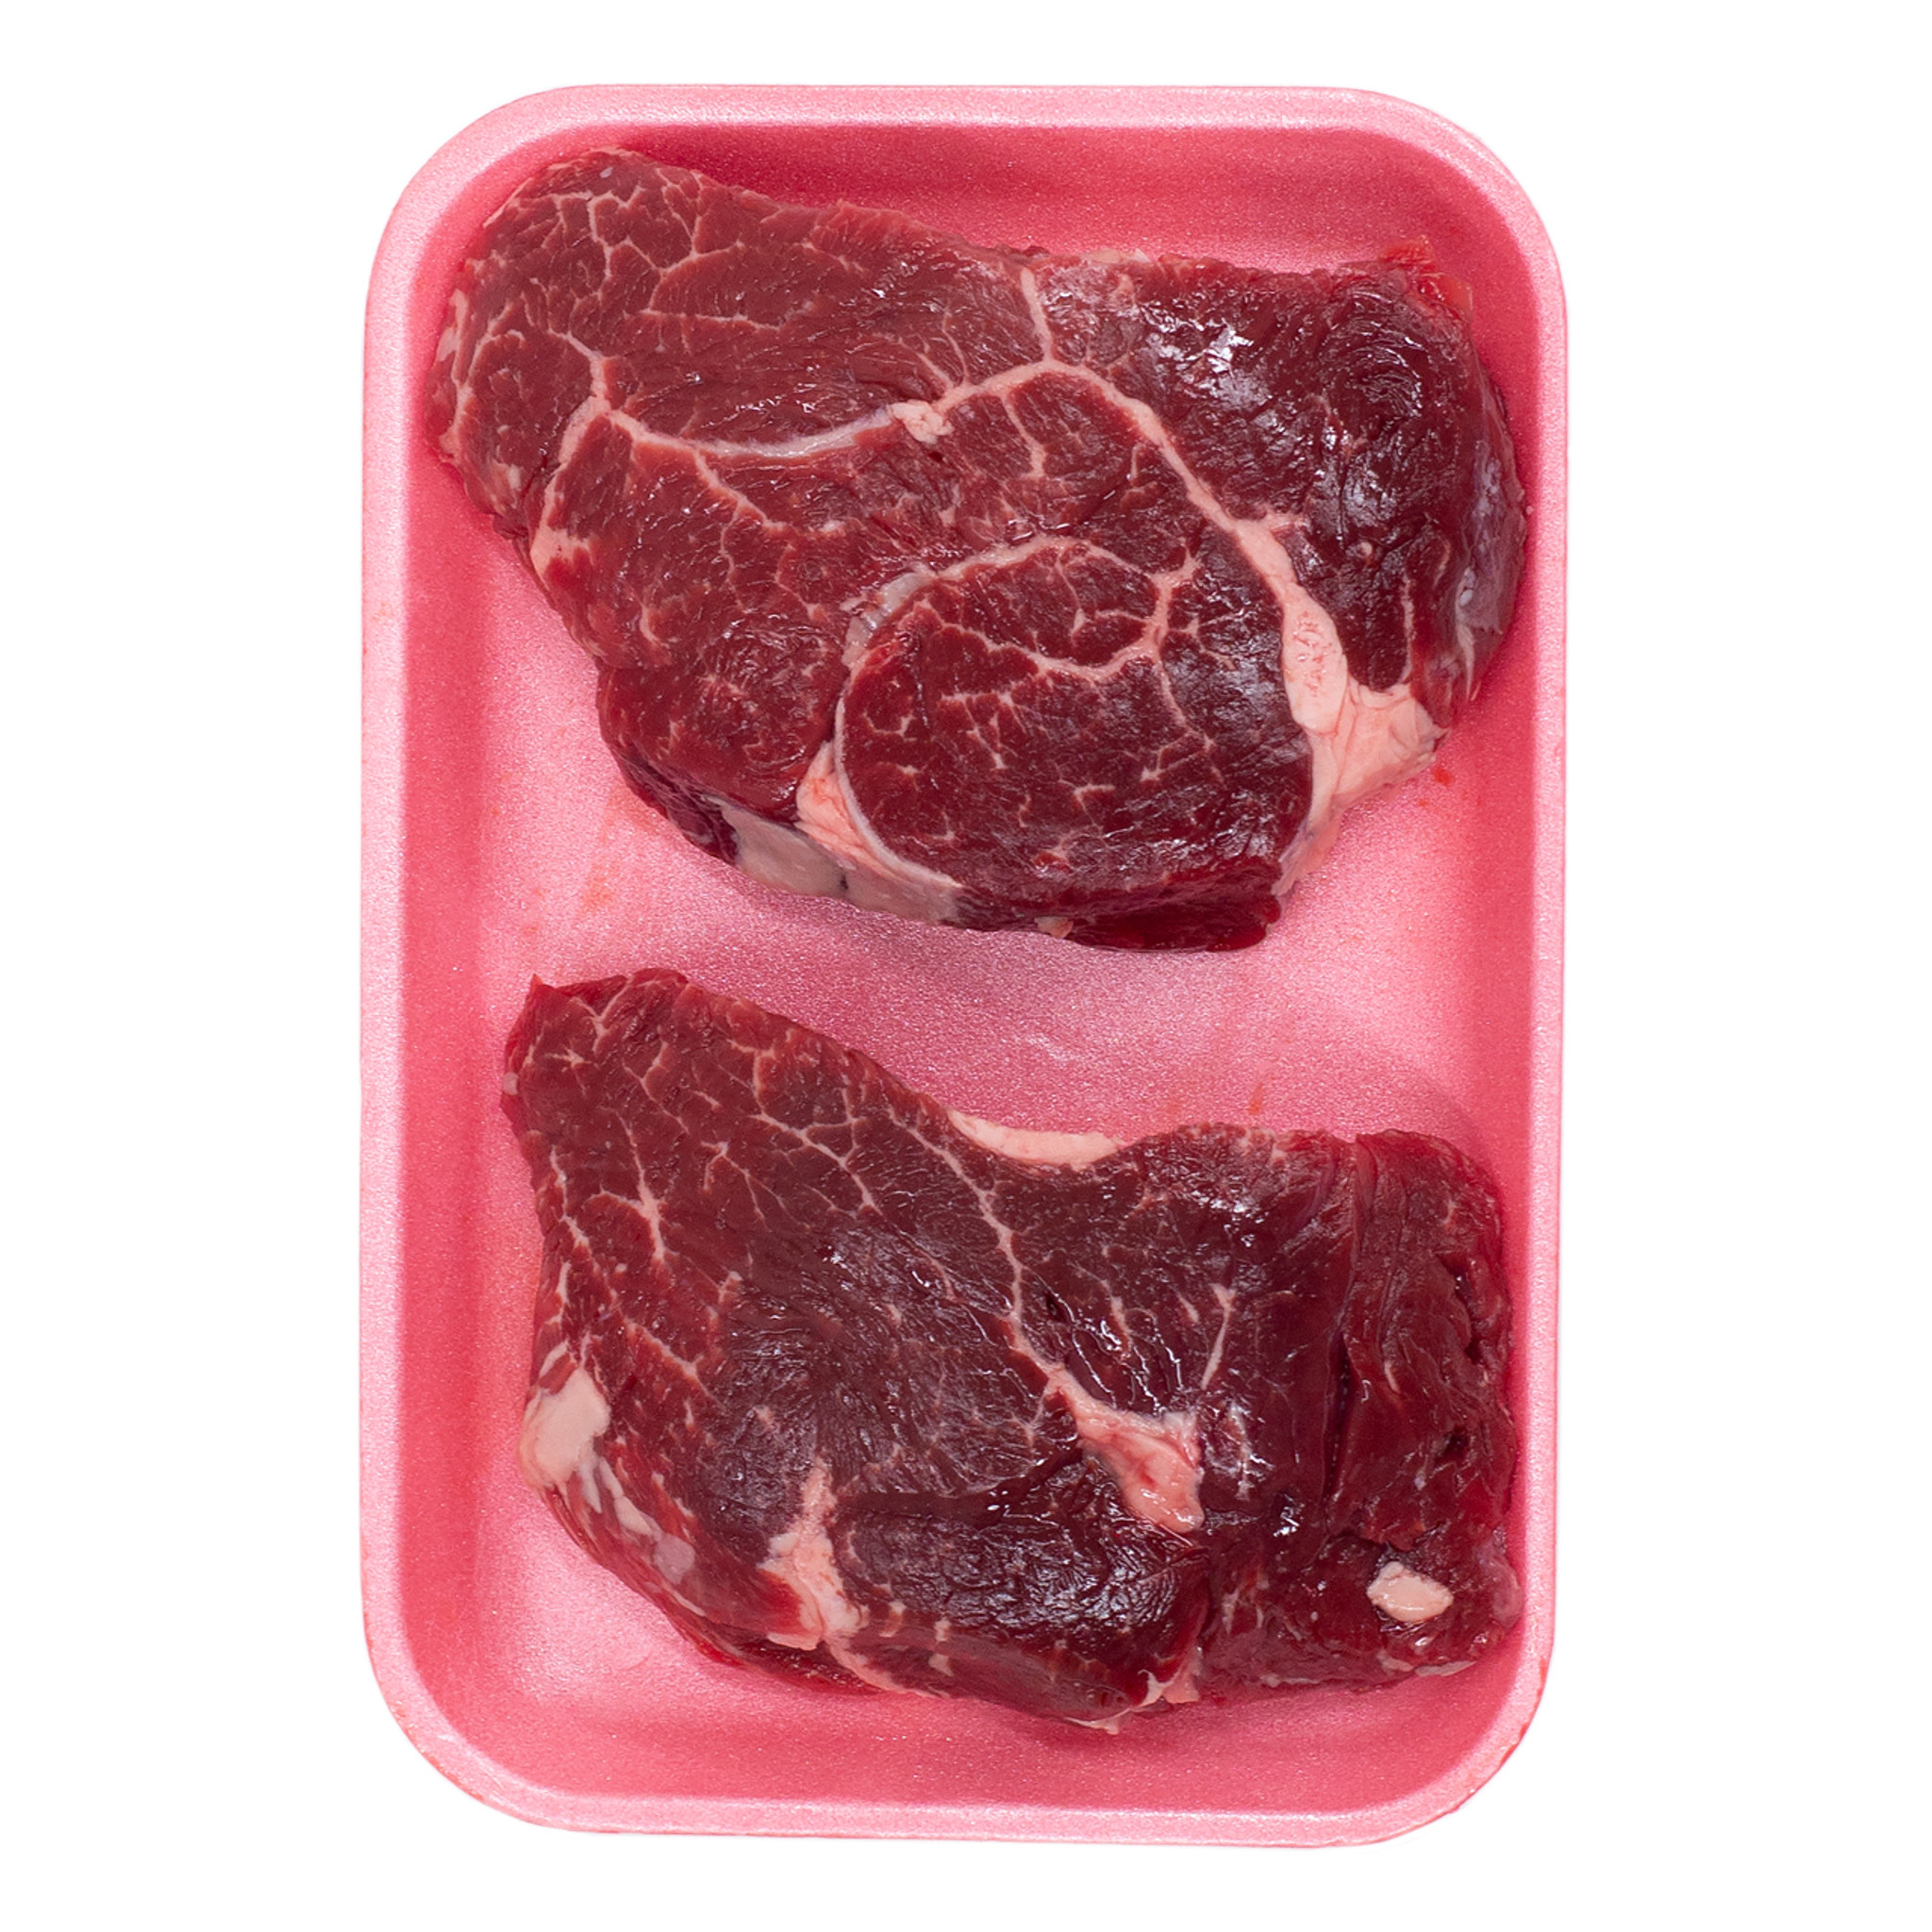 Filet Mignon 2 Pack 1 Lb. - Wholey's Curbside